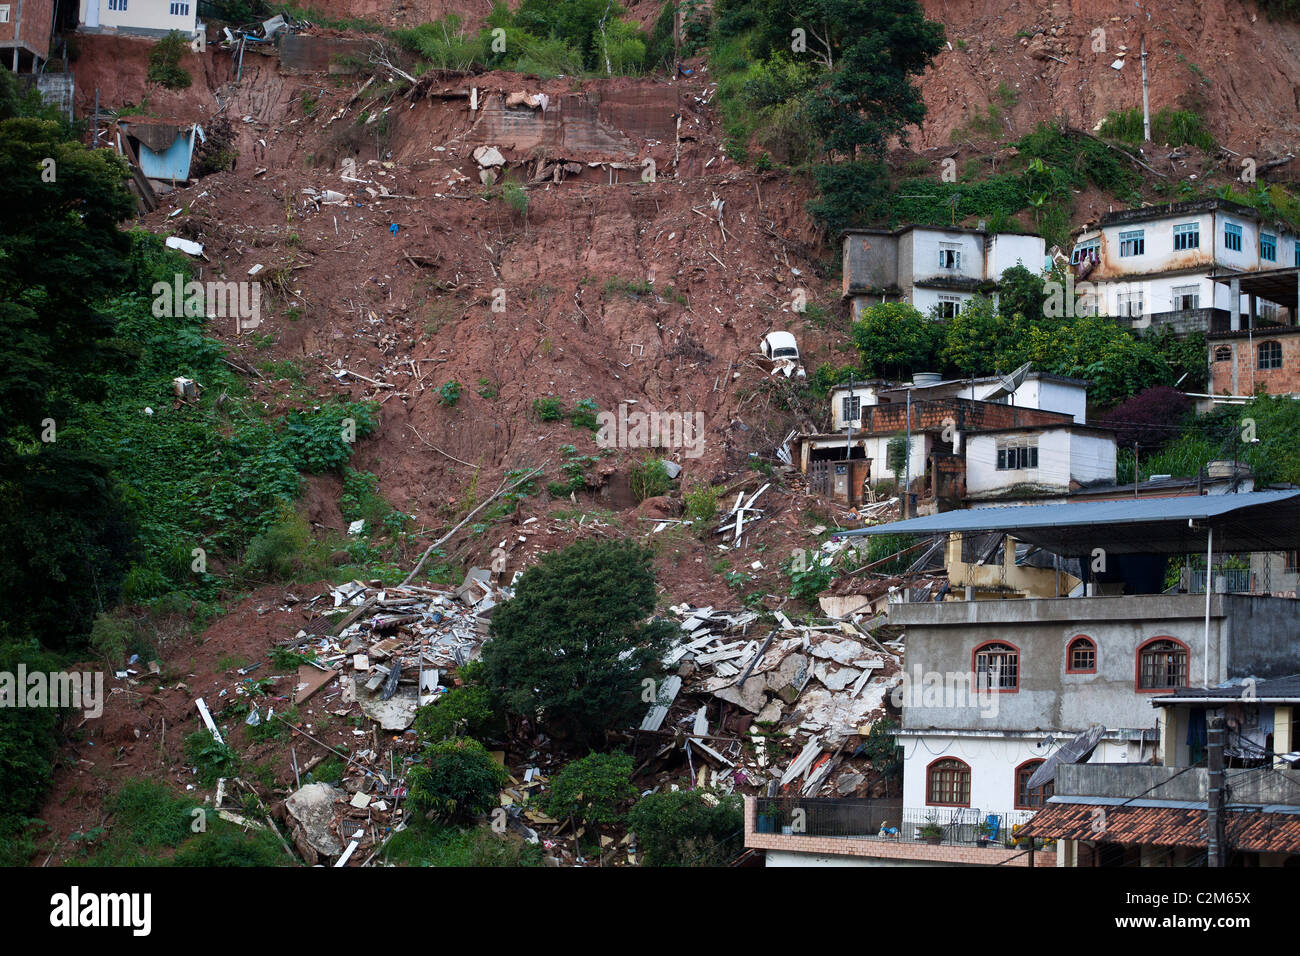 Two months after January 2011 Nova Friburgo flooding, Rio de Janeiro State, Brazil Havoc and ruins at Vilage quarter Stock Photo